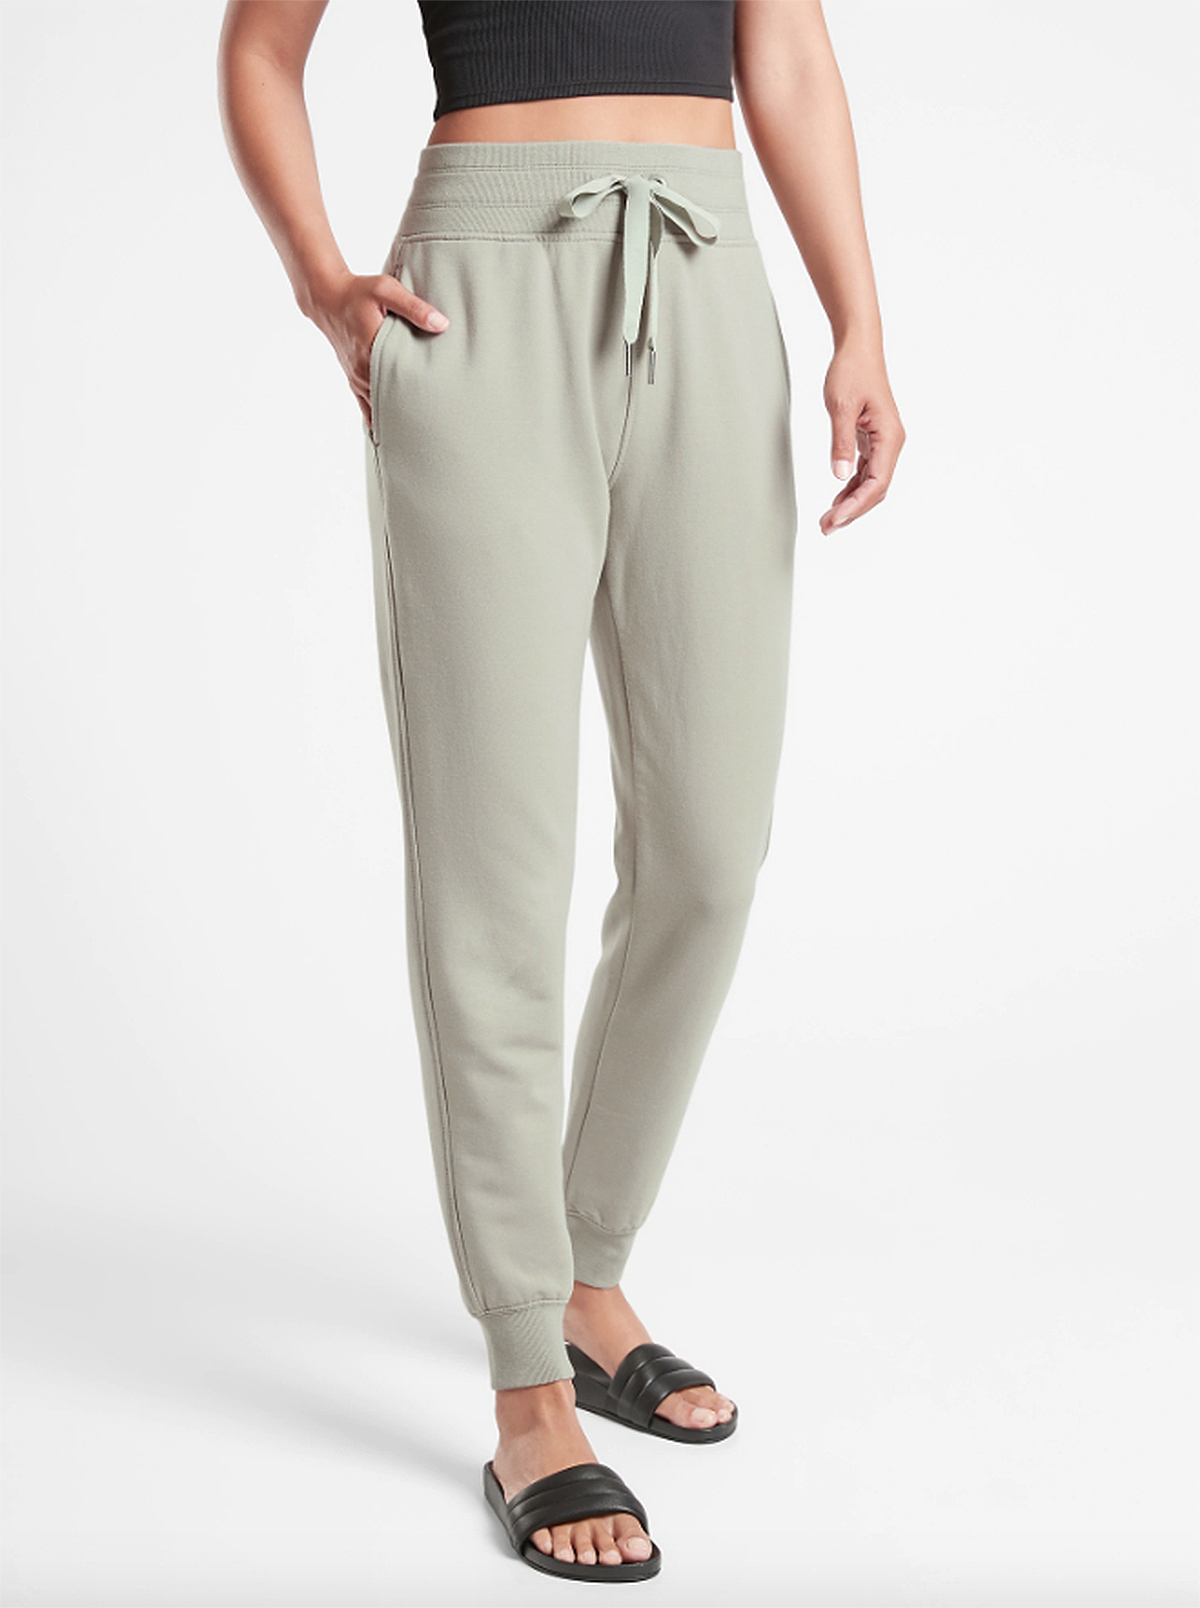 15 Best Joggers For Women That Are Super Comfy and Stylish